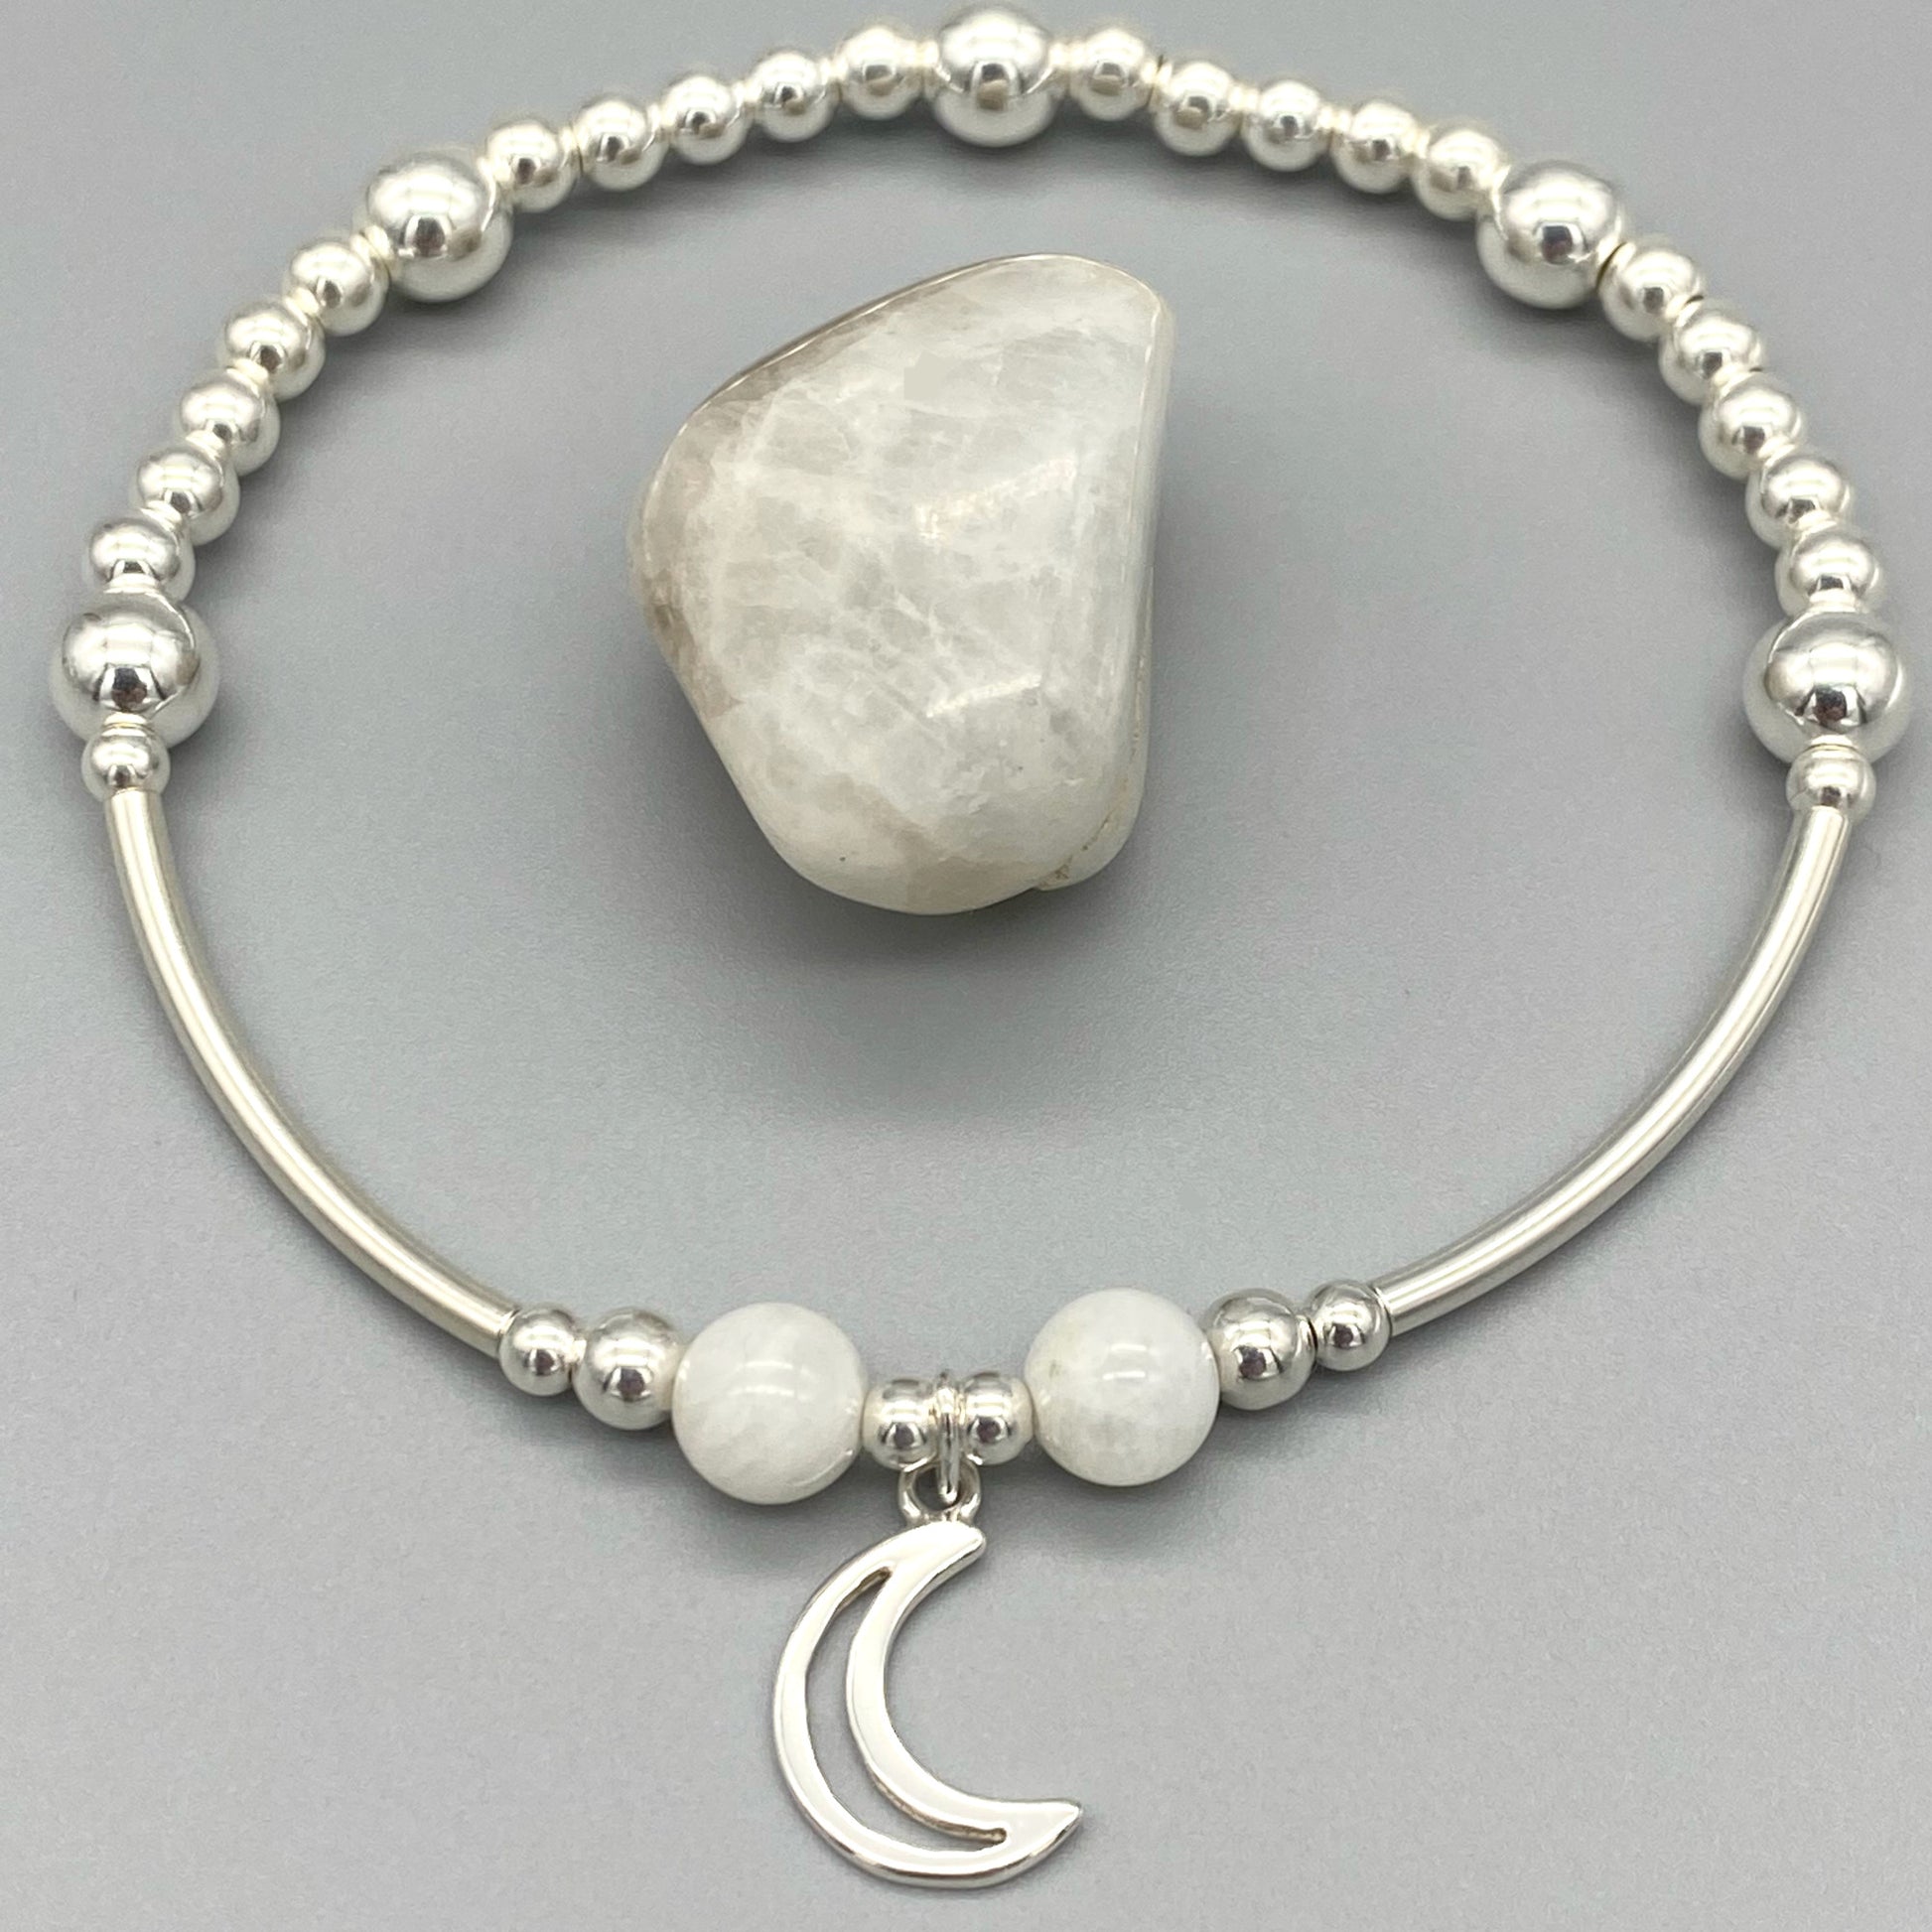 Moon charm & moonstone beads sterling silver stacking bracelet for her by My Silver Wish